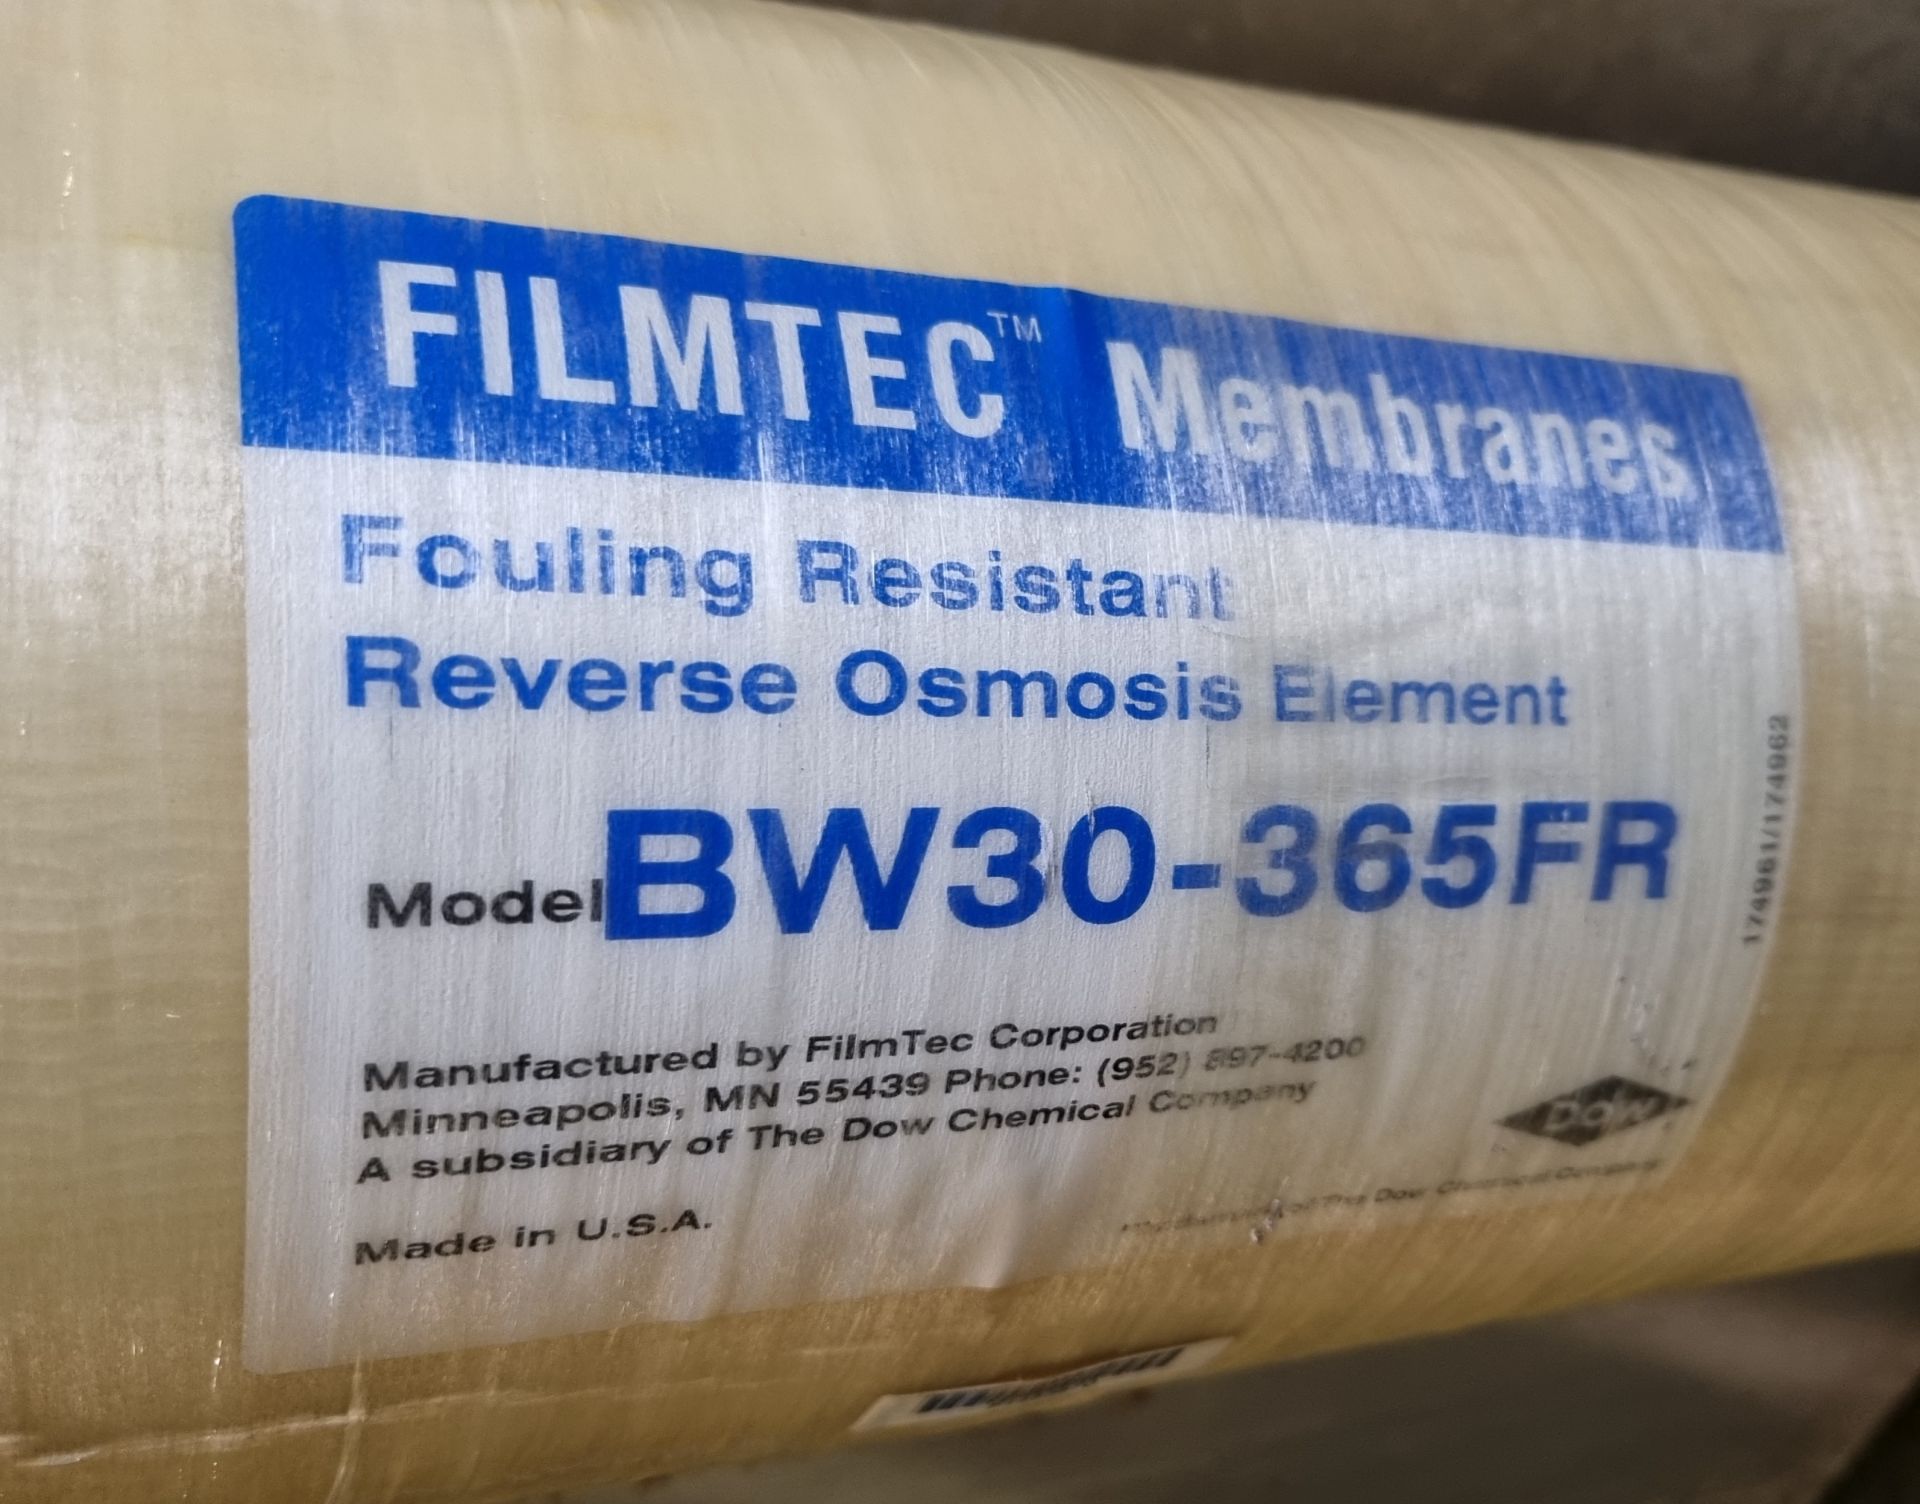 Filmtec Membranes BW30-365FR fouling resistance reverse osmosis element - Image 3 of 3